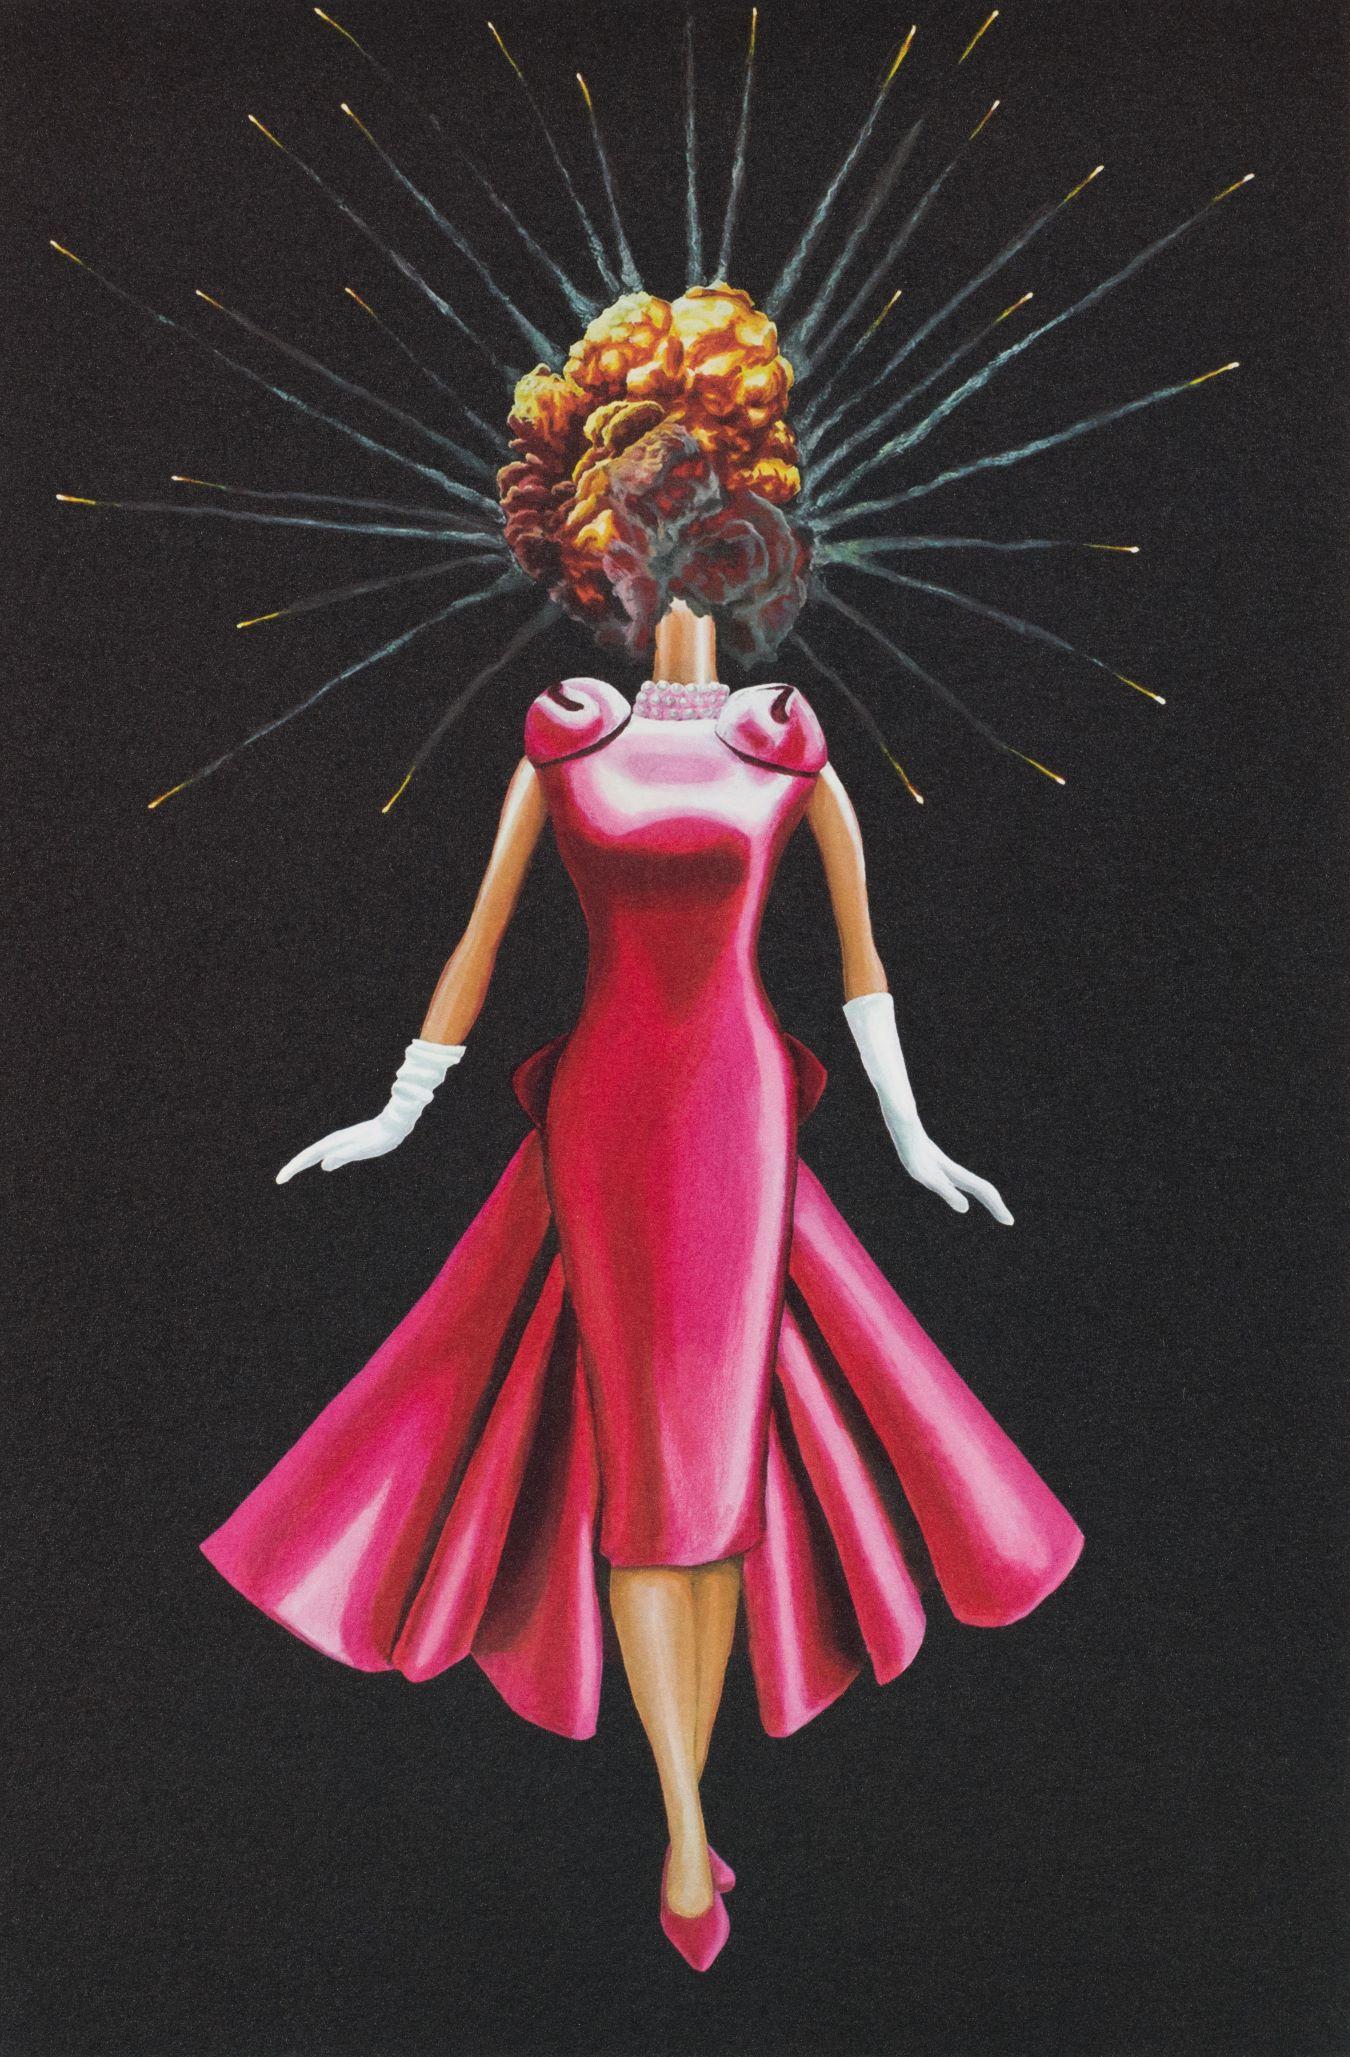 Blow Up Doll IV - Contemporary Print by Robert Deyber 